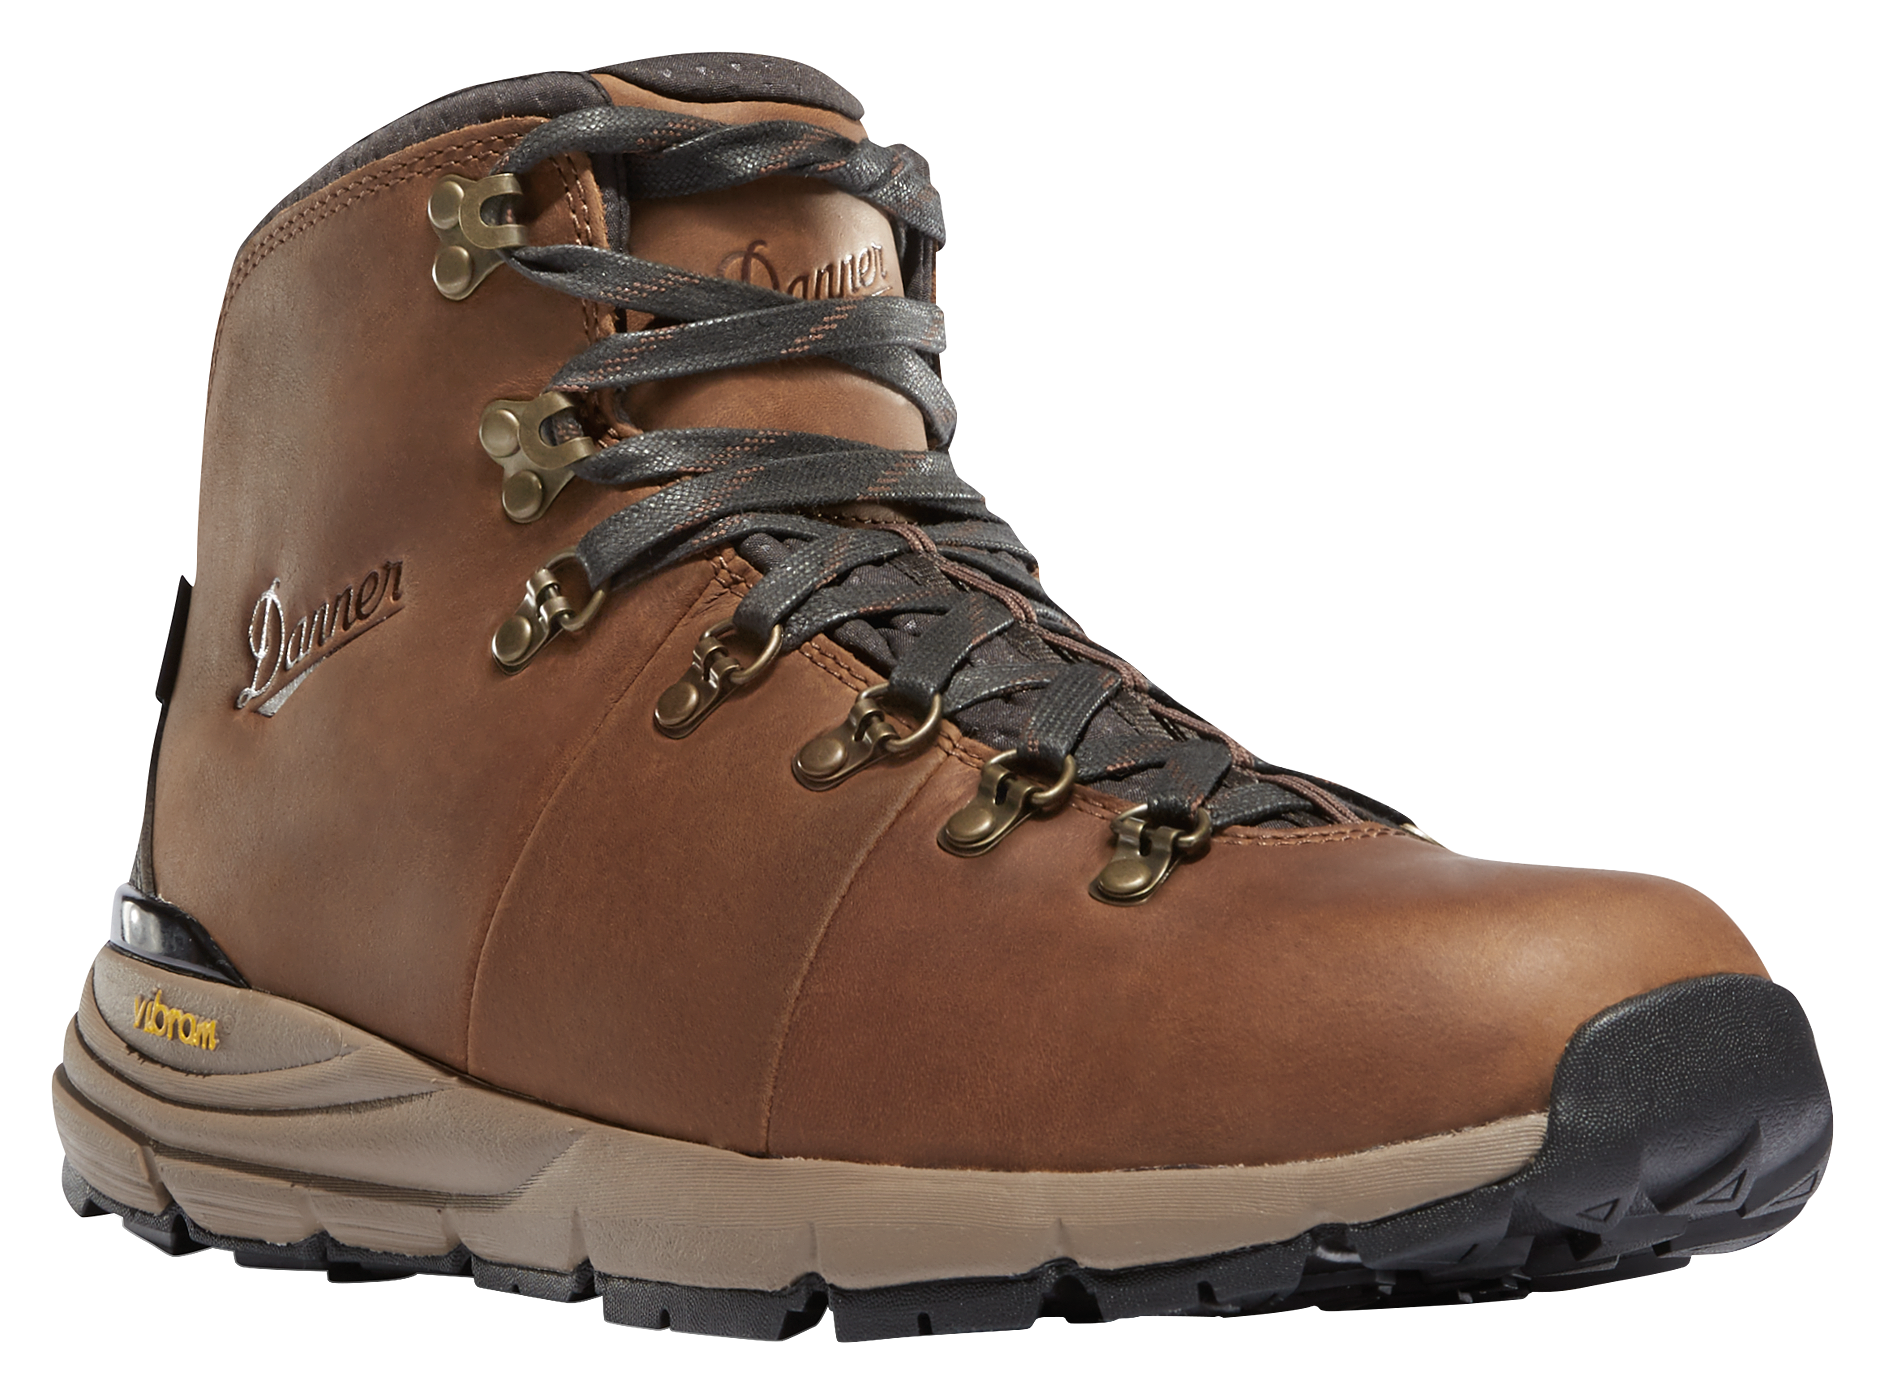 Danner Mountain 600 Waterproof Hiking Boots for Men - Rich Brown - 9.5M